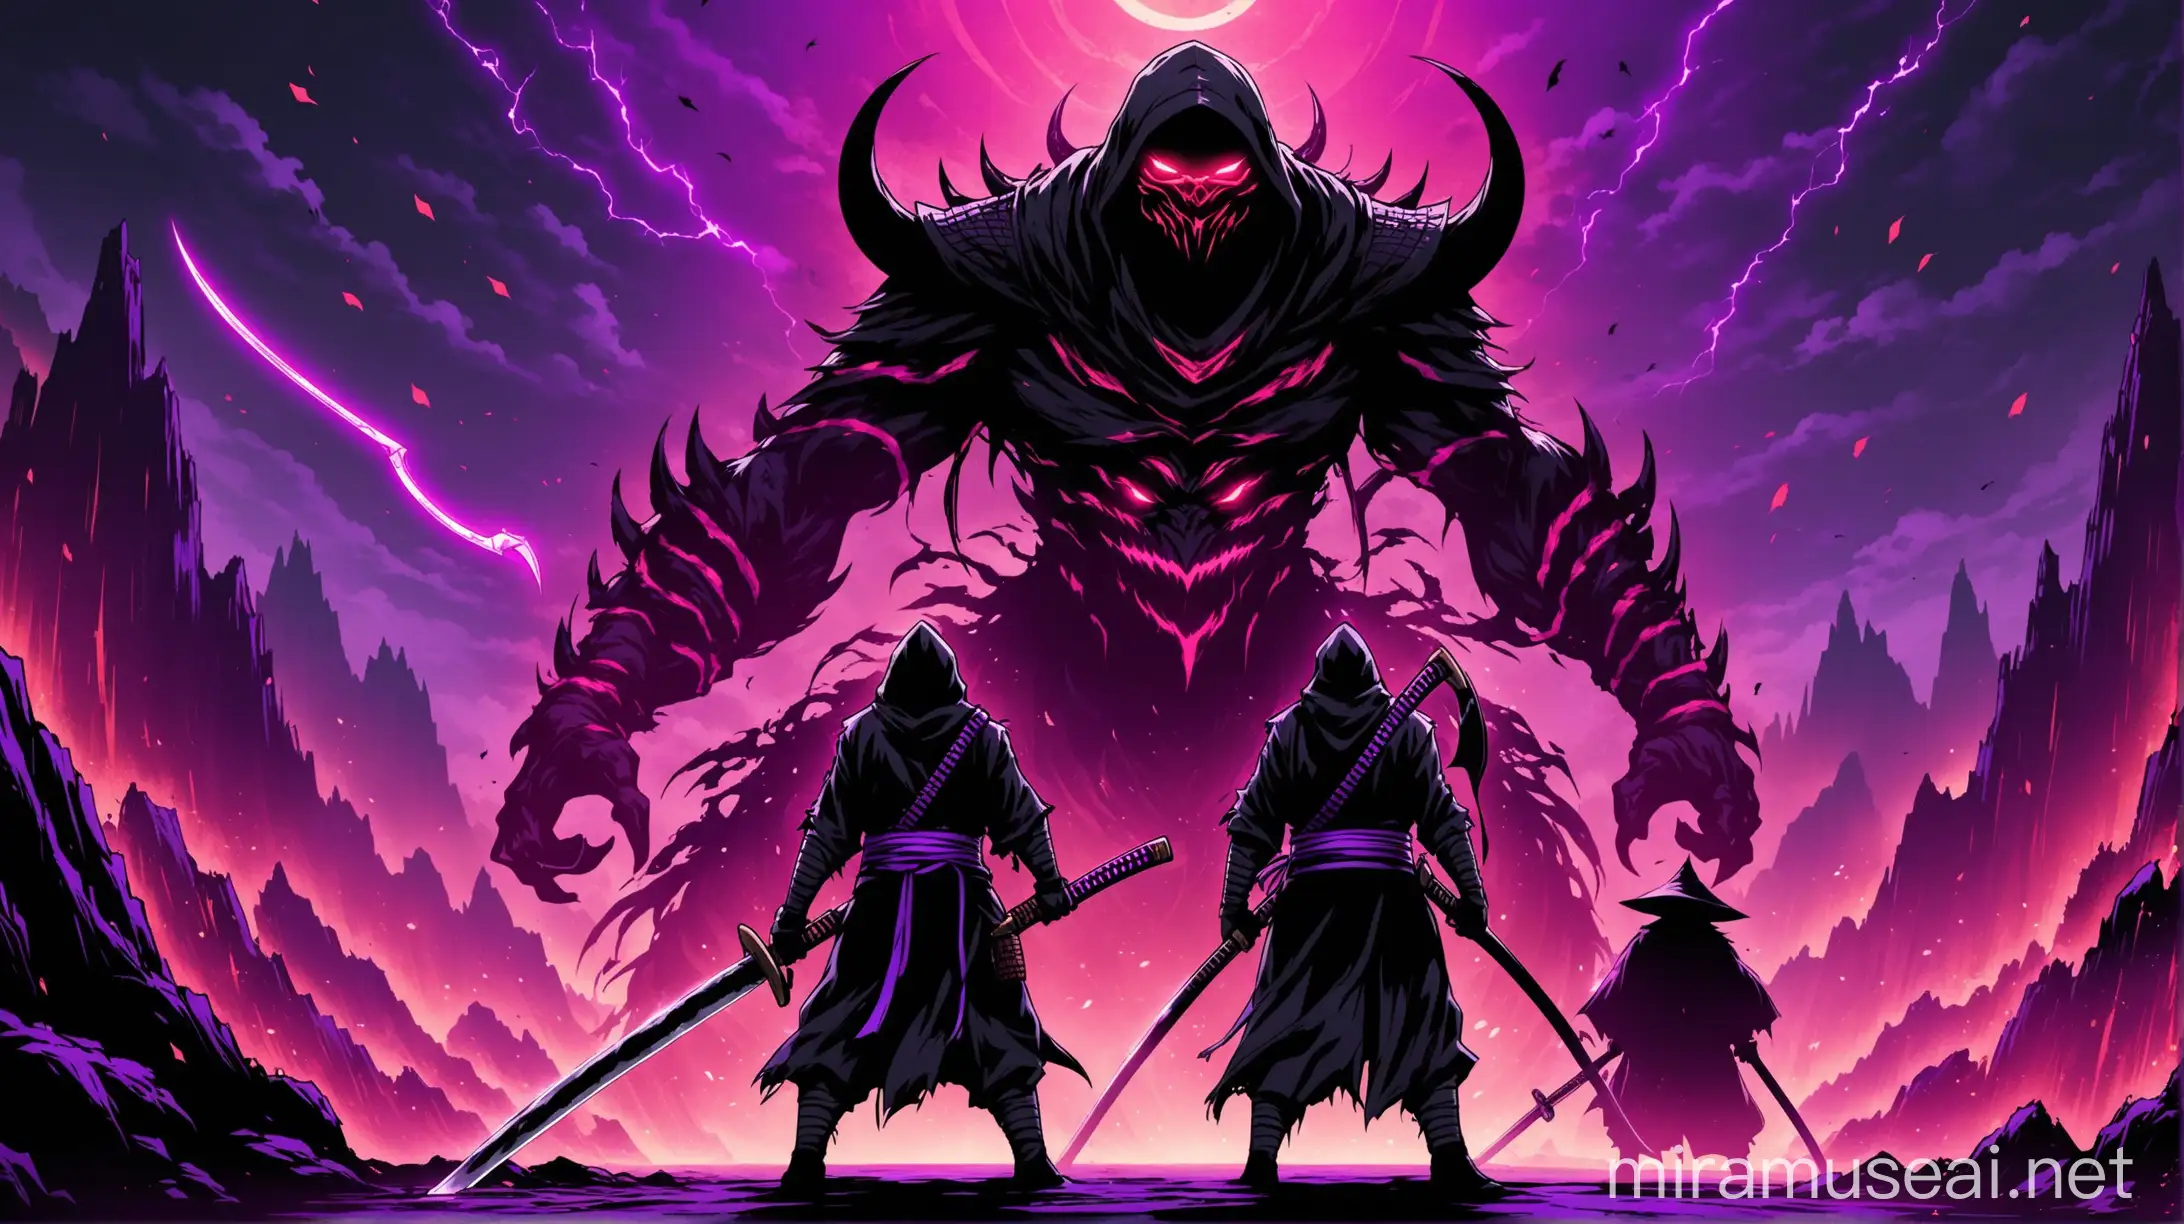 Epic Battle RedGlowing Ninja and PurpleGlowing Sorcerer Face Defeated Monster